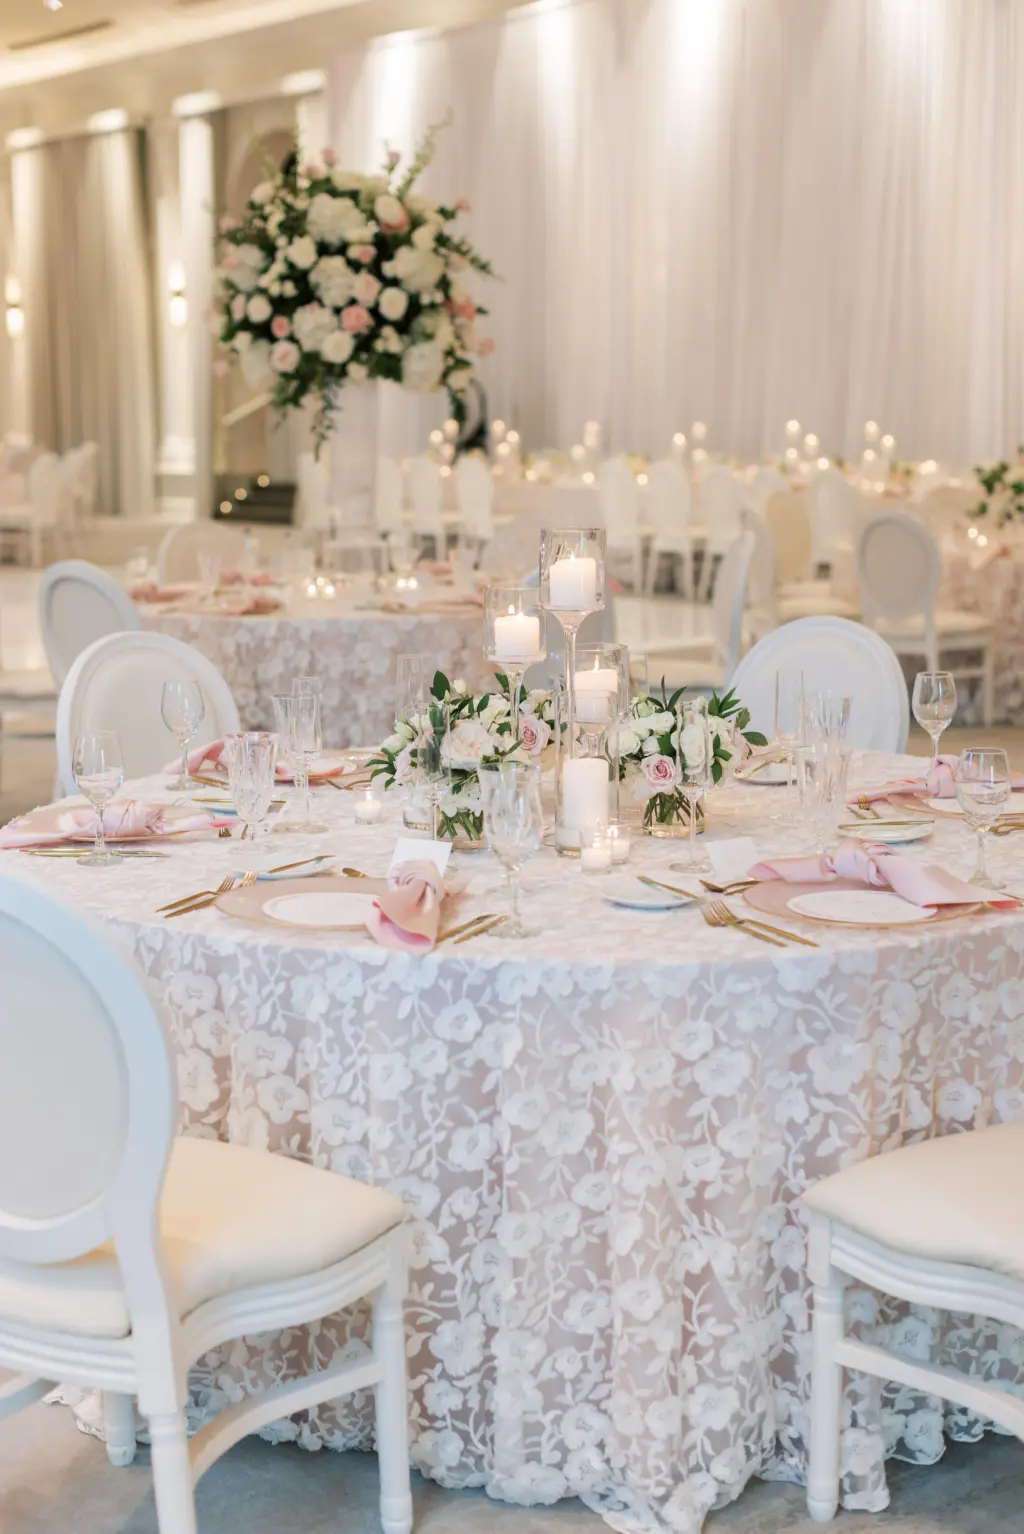 Vintage Pink Old Florida Wedding Reception Table Setting Inspiration | Frosted Glass Chargers, Gold Flatware, White Lace Overlay and Blush Linen Ideas